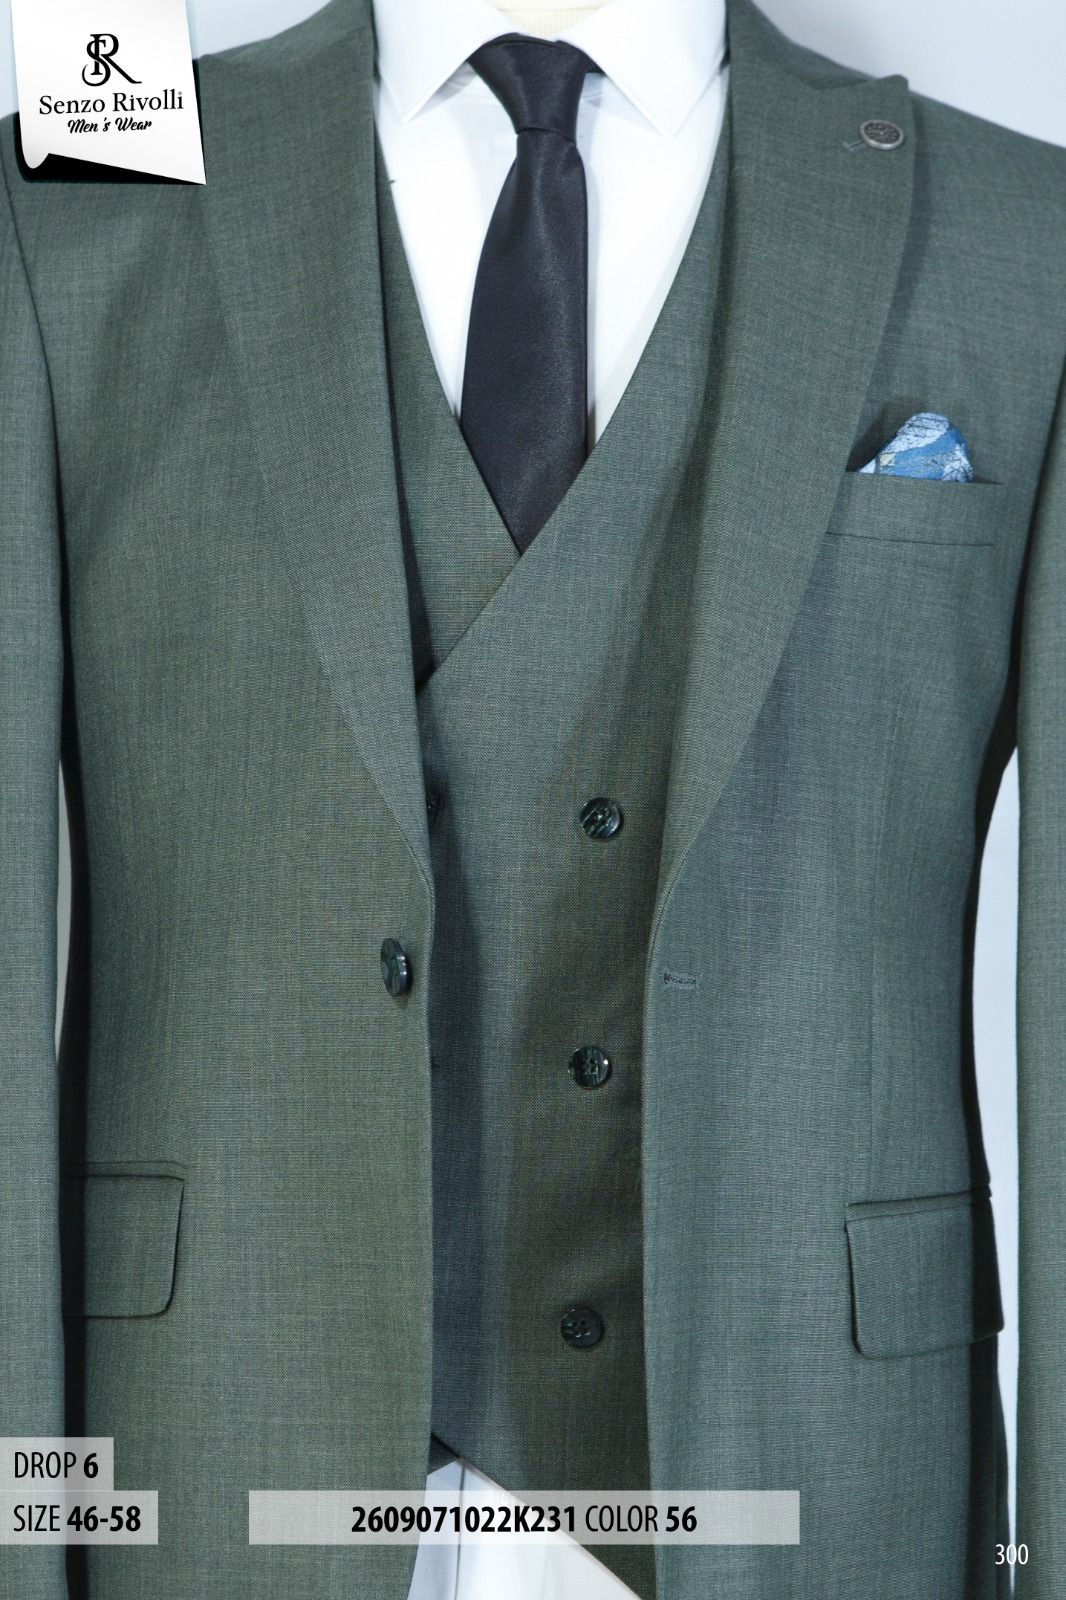 EXECUTIVE ARMY GREEN 3 PIECE TURKER SUIT WITH BLACK BUTTON [SWNL]